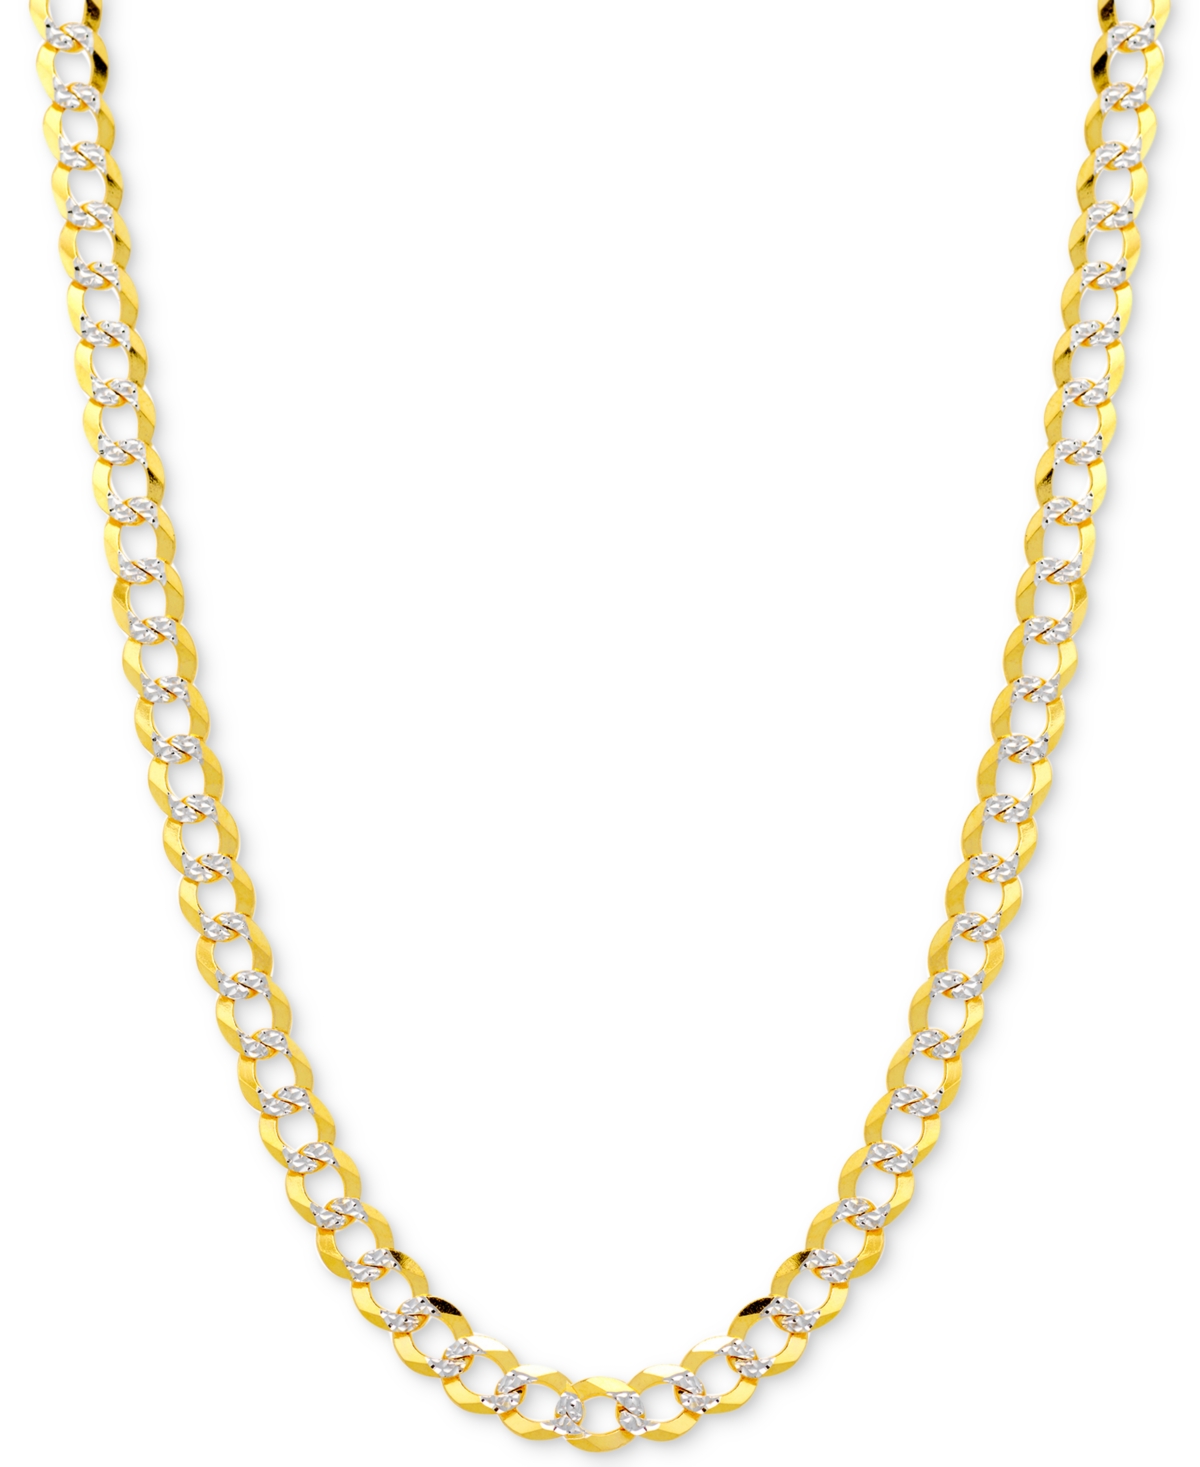 20" Two-Tone Open Curb Link Chain Necklace in Solid 14k Gold & White Gold - Two-Tone